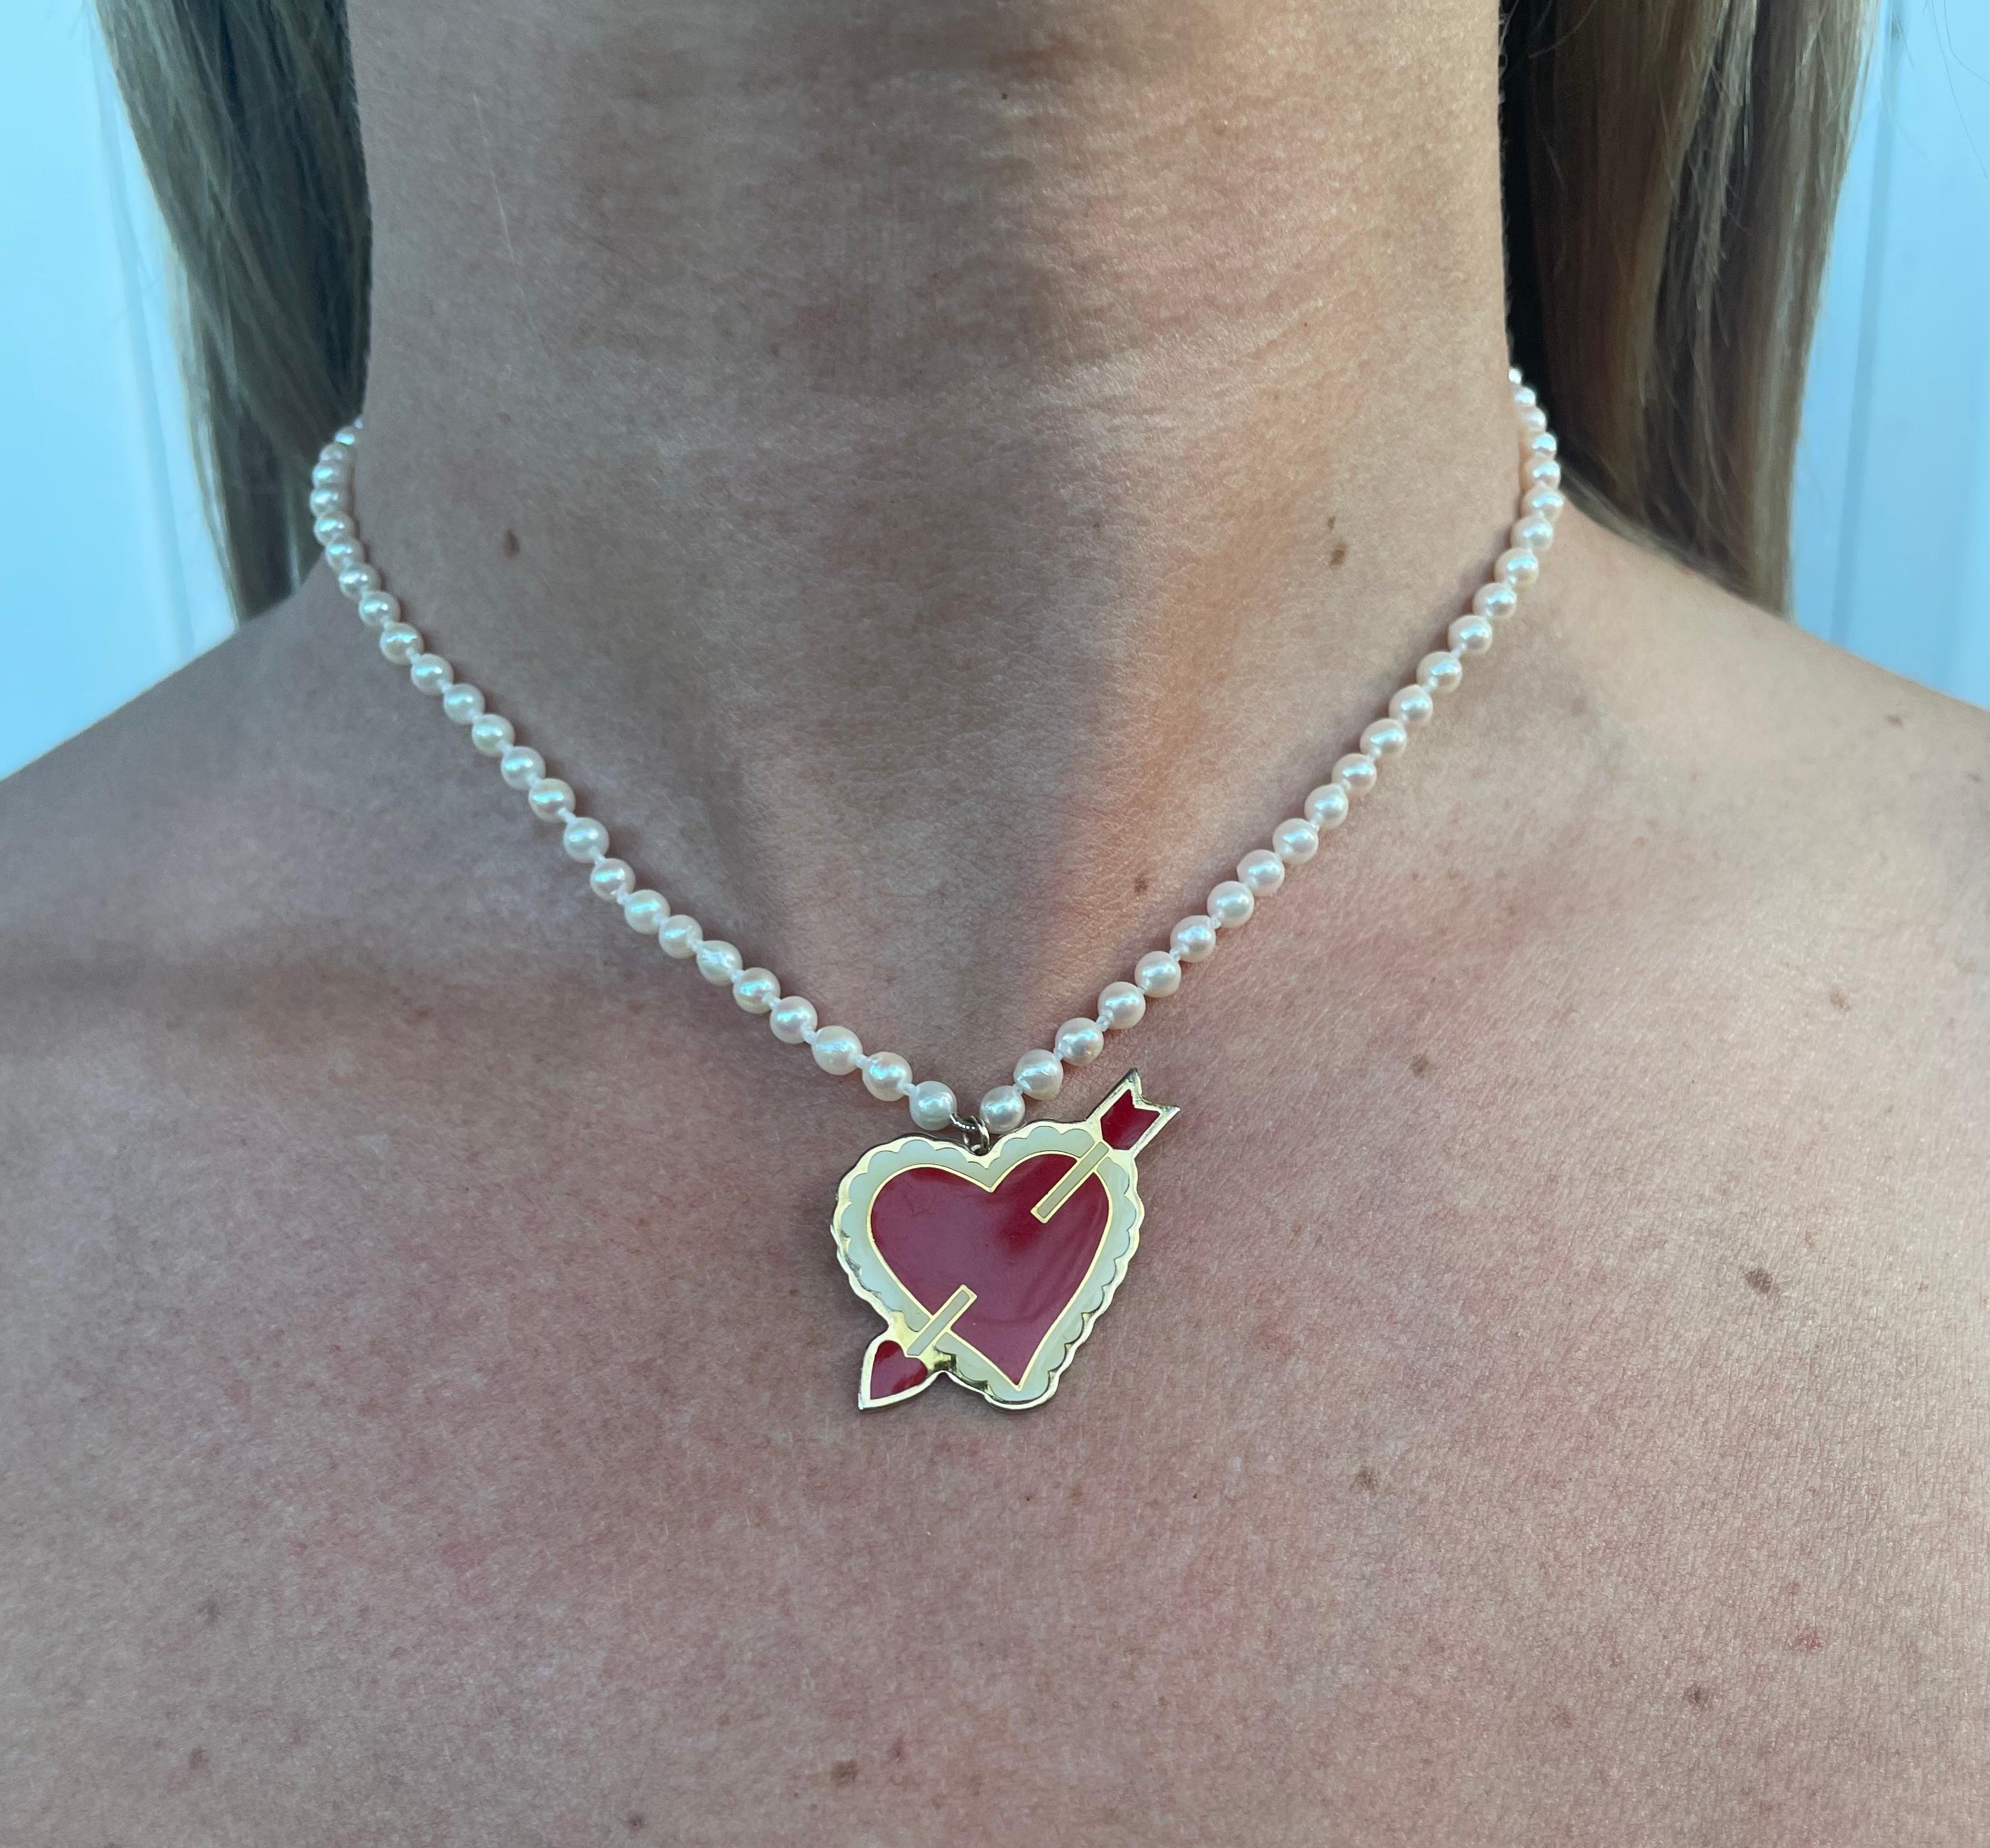 Artisan Marina J. Valentine's Pearl Strung Necklace with Vintage Pendant For Sale